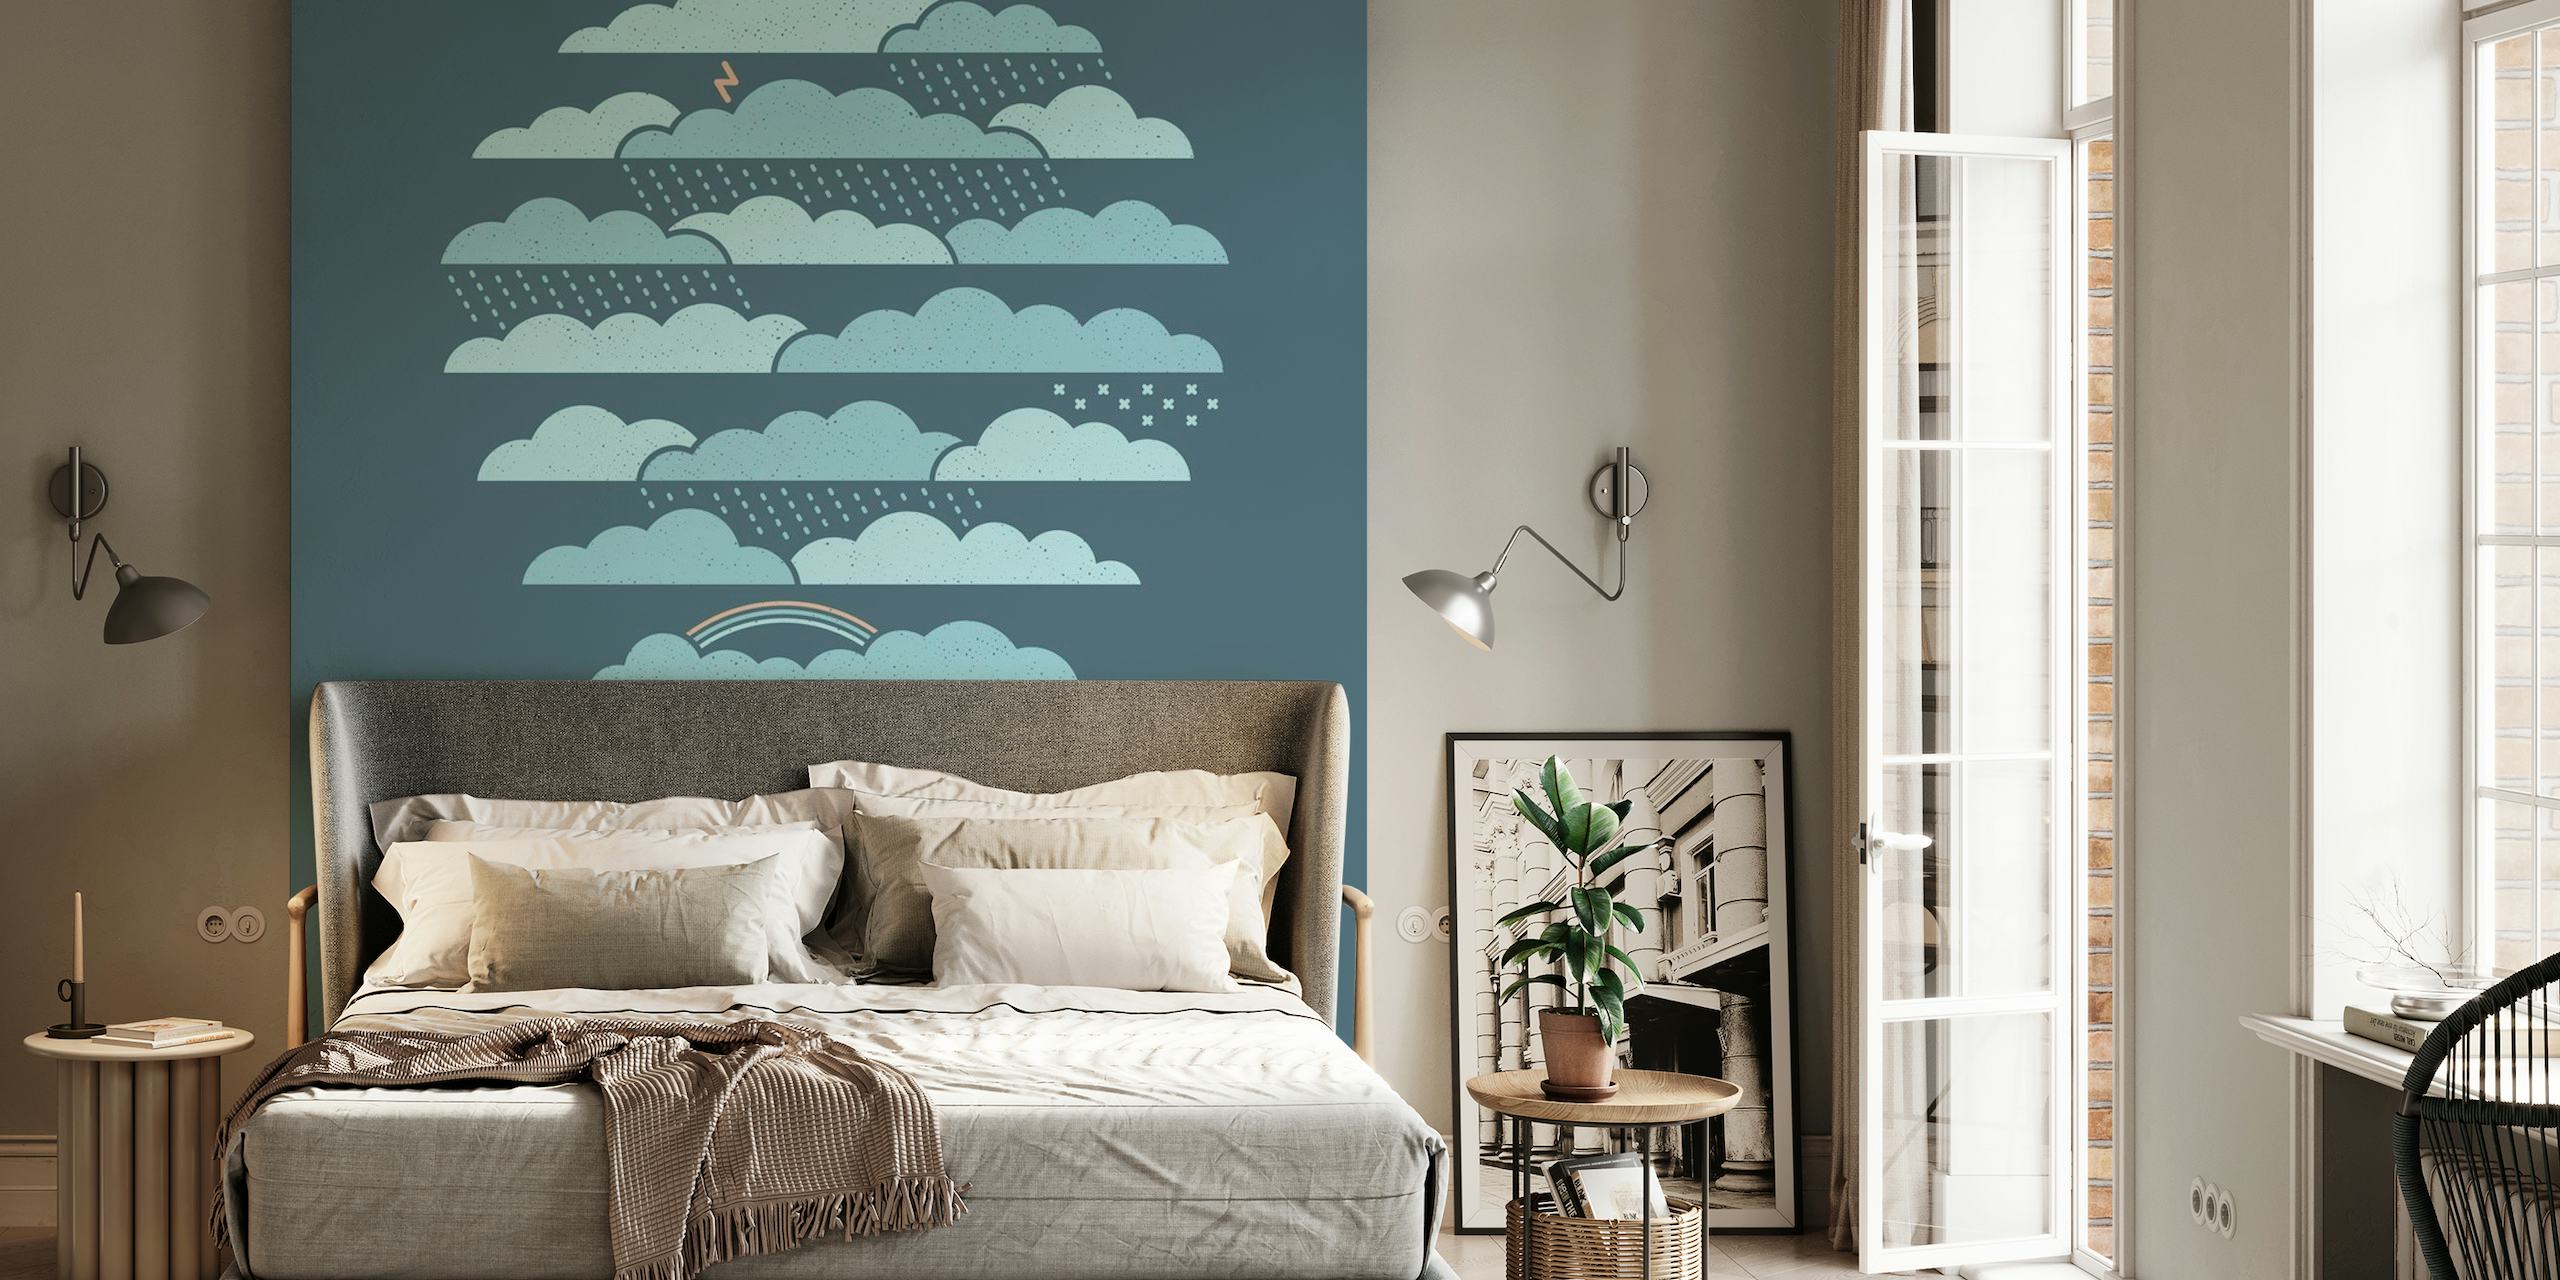 Stylized weather balloon floating among layered clouds in shades of blue wall mural